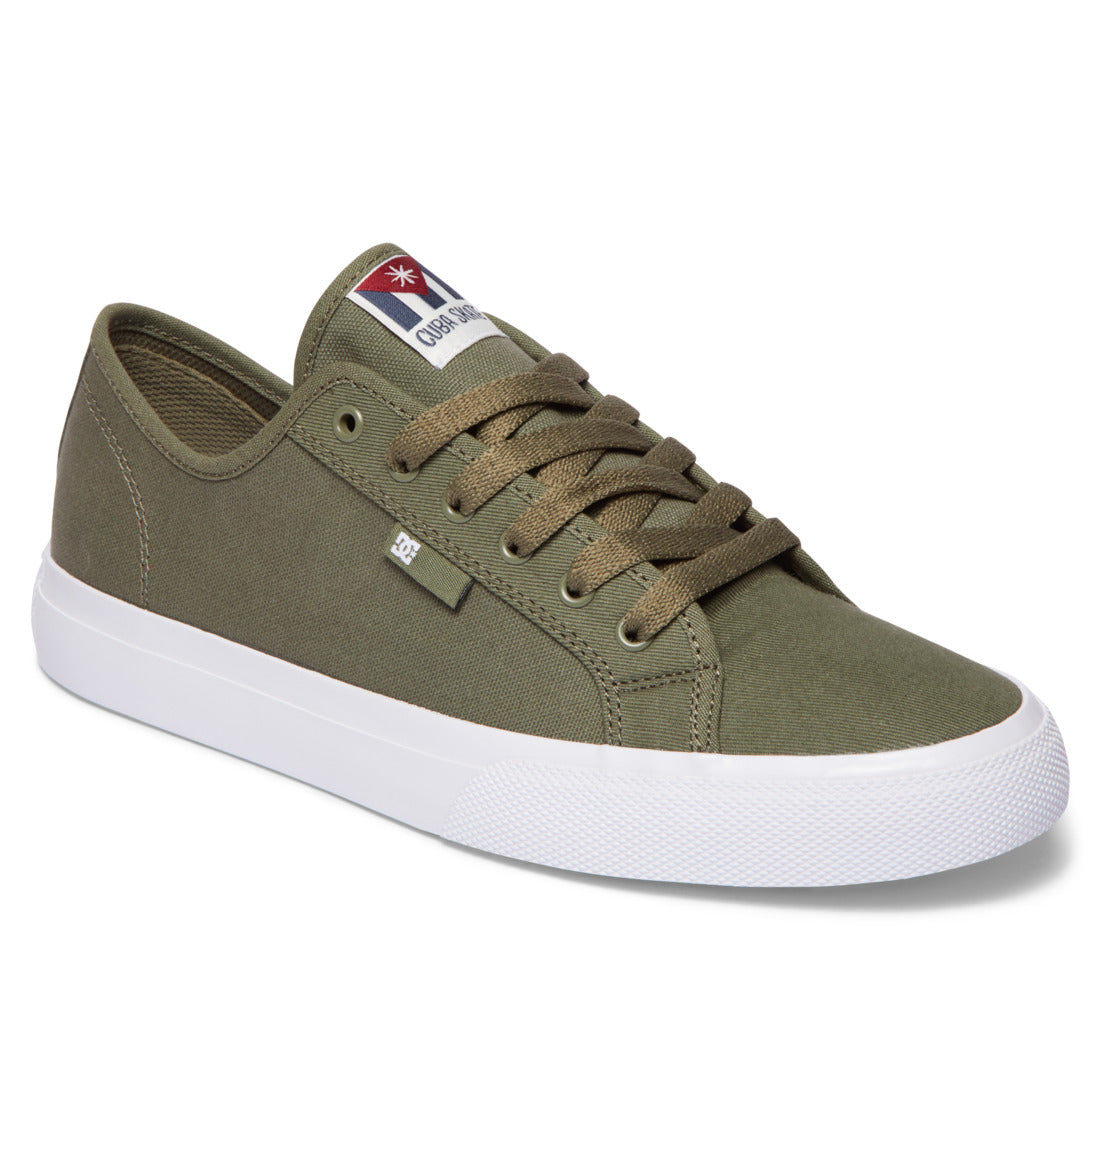 DC Manual Cuba Skate Canvas Shoes Army/Olive